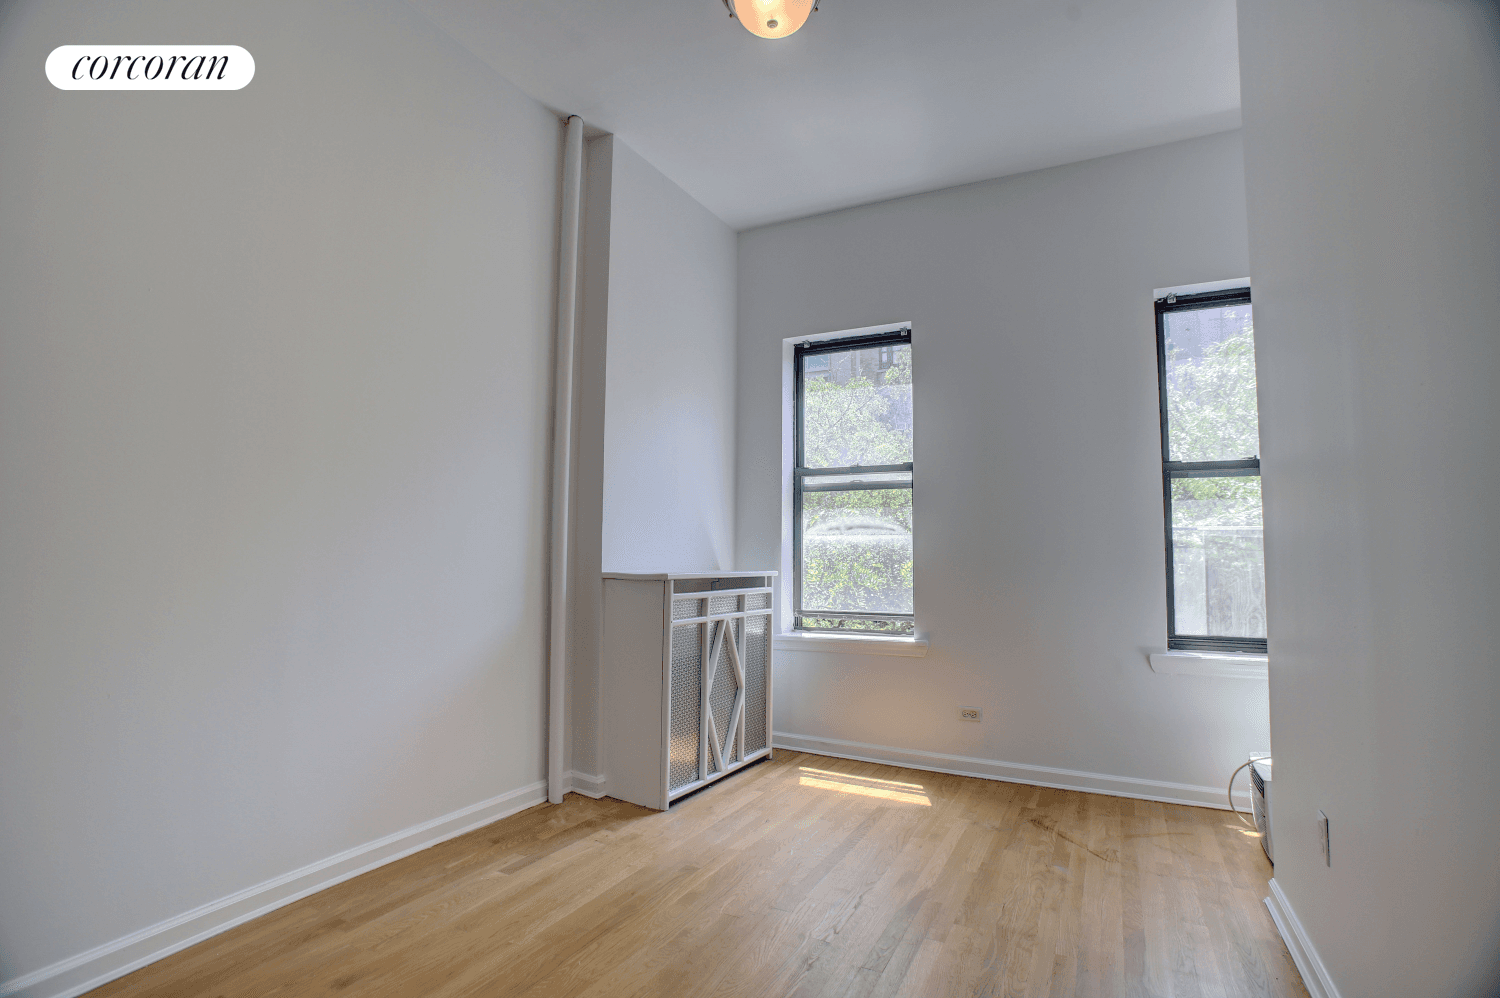 W. 72nd Street two bedroom in a well maintained pre war building situated on 72nd street between Columbus and Amsterdam Avenue.